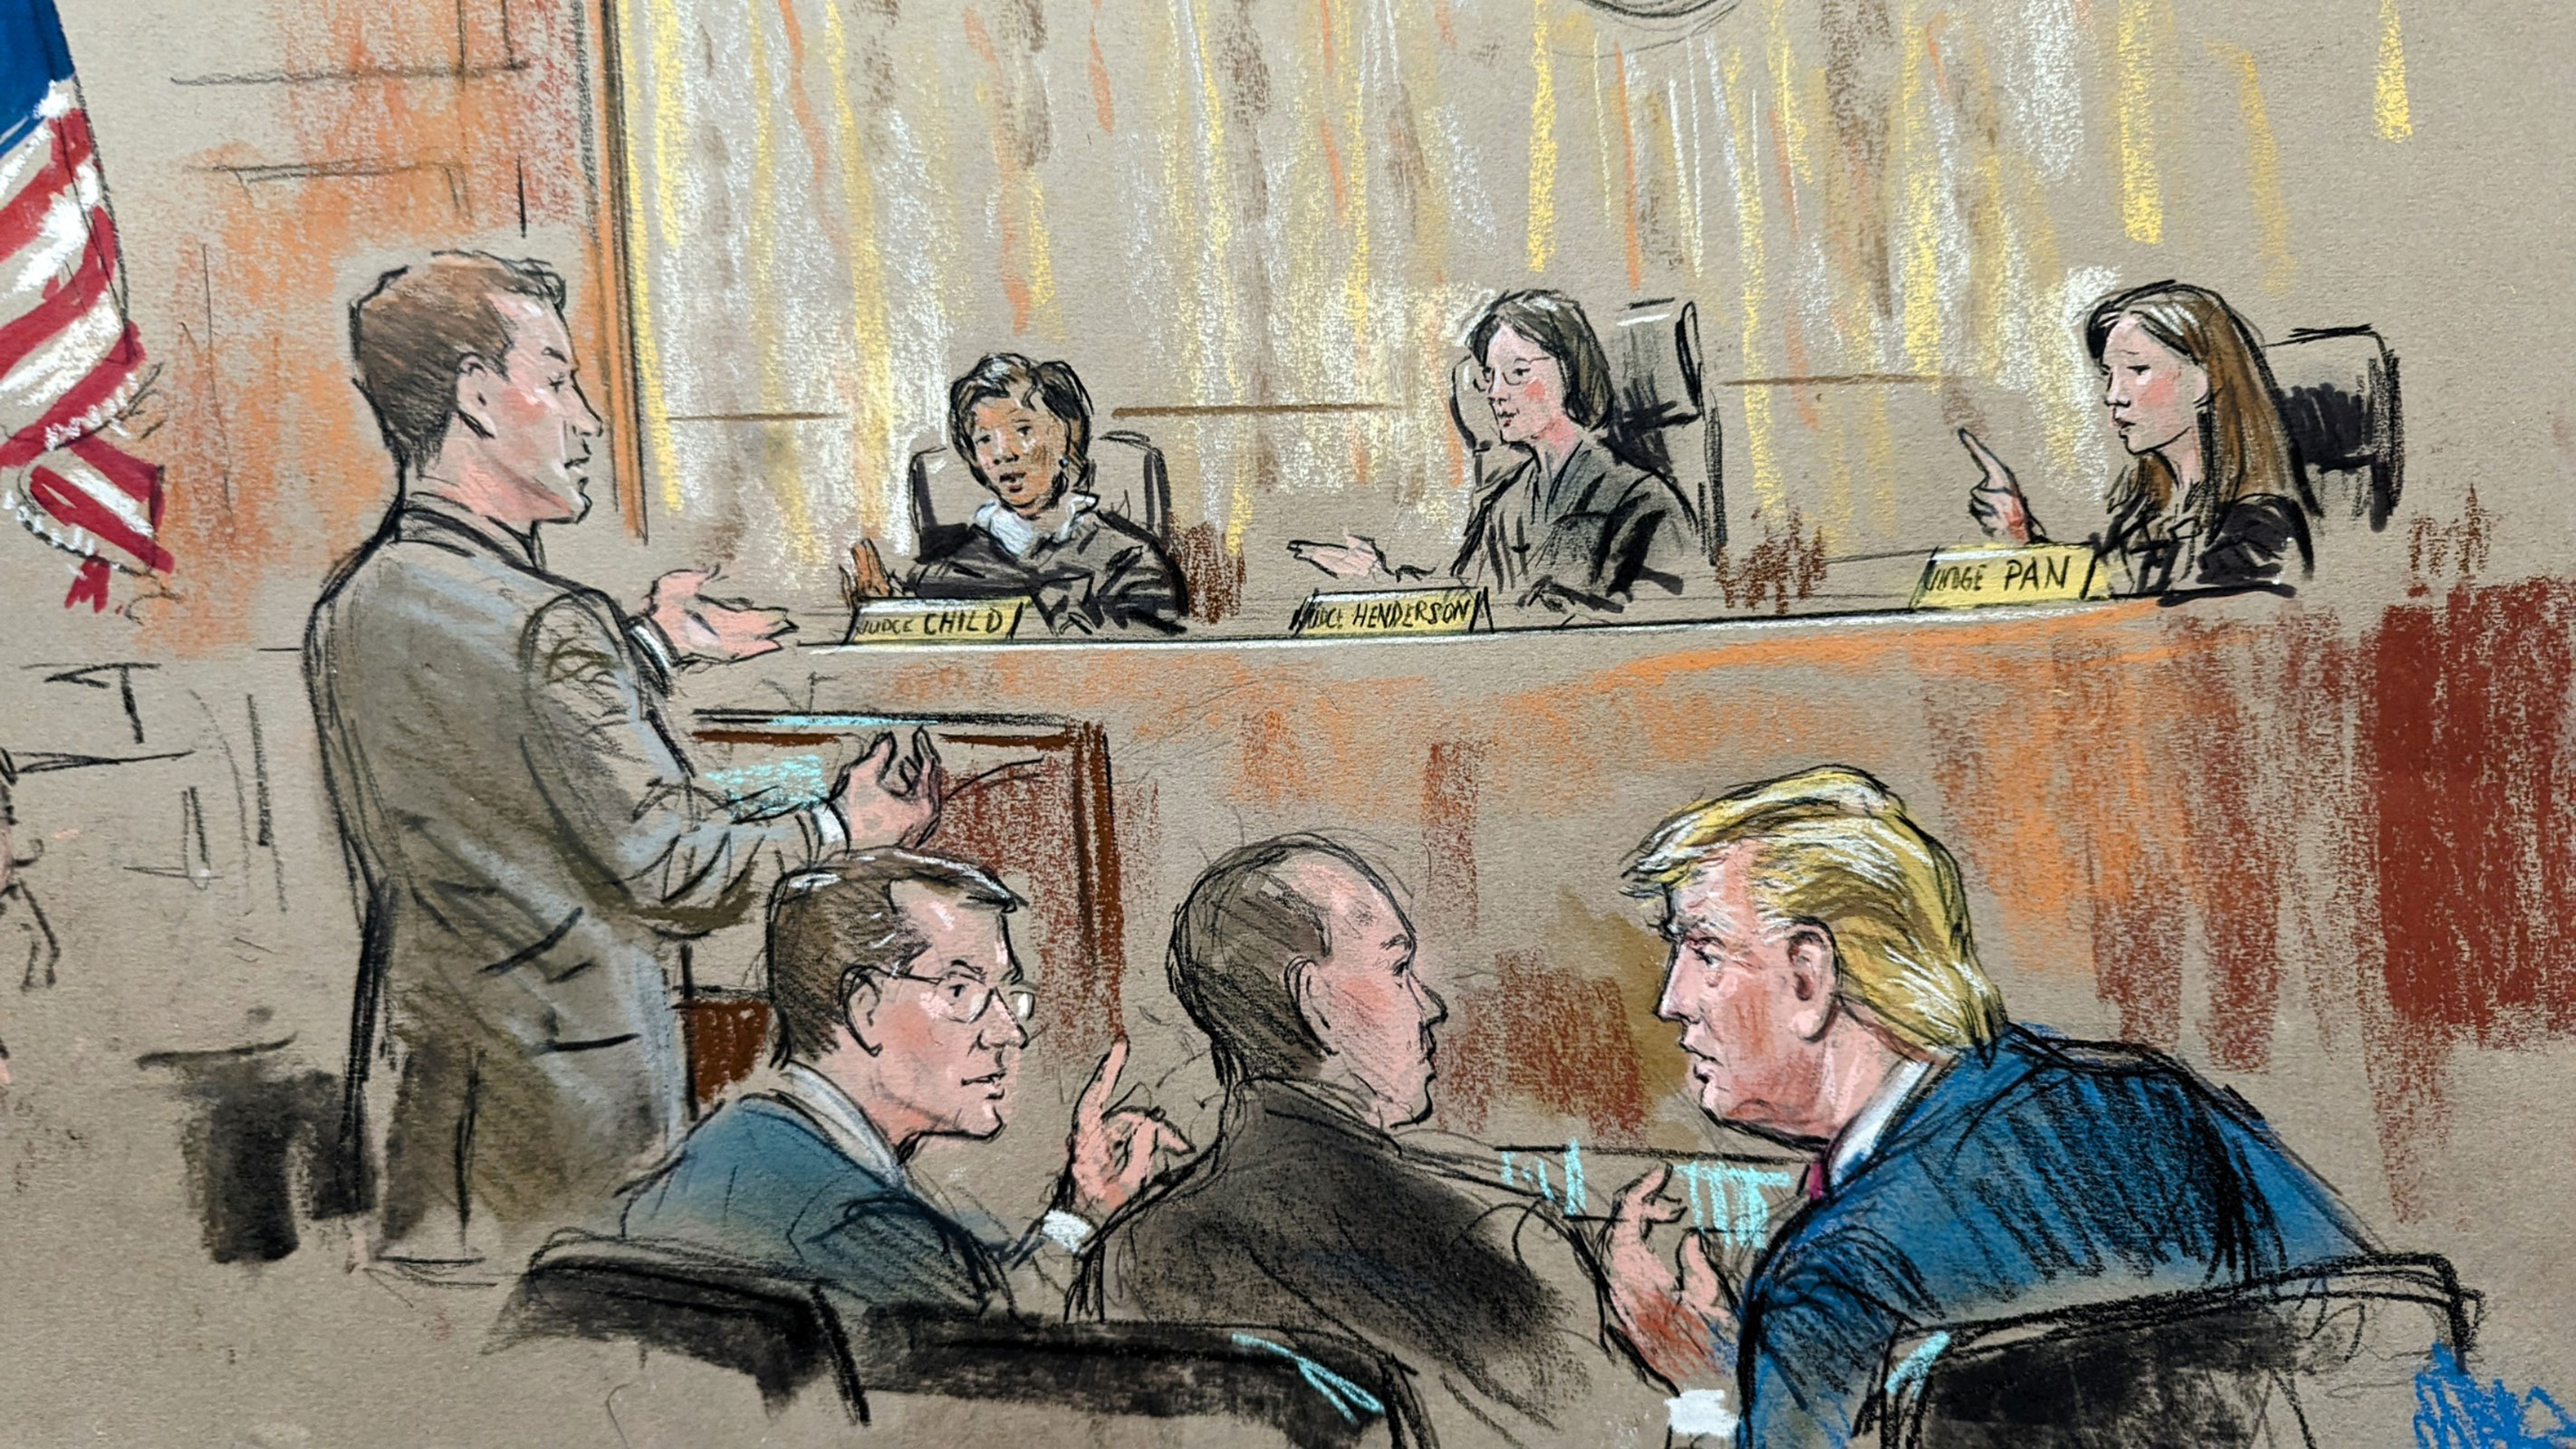 James Pearce, an attorney arguing on behalf of the Department of Justice's special counsel’s office, speaks before the DC Circuit Court of Appeals at the federal courthouse on Tuesday, January 9, in Washington, DC.